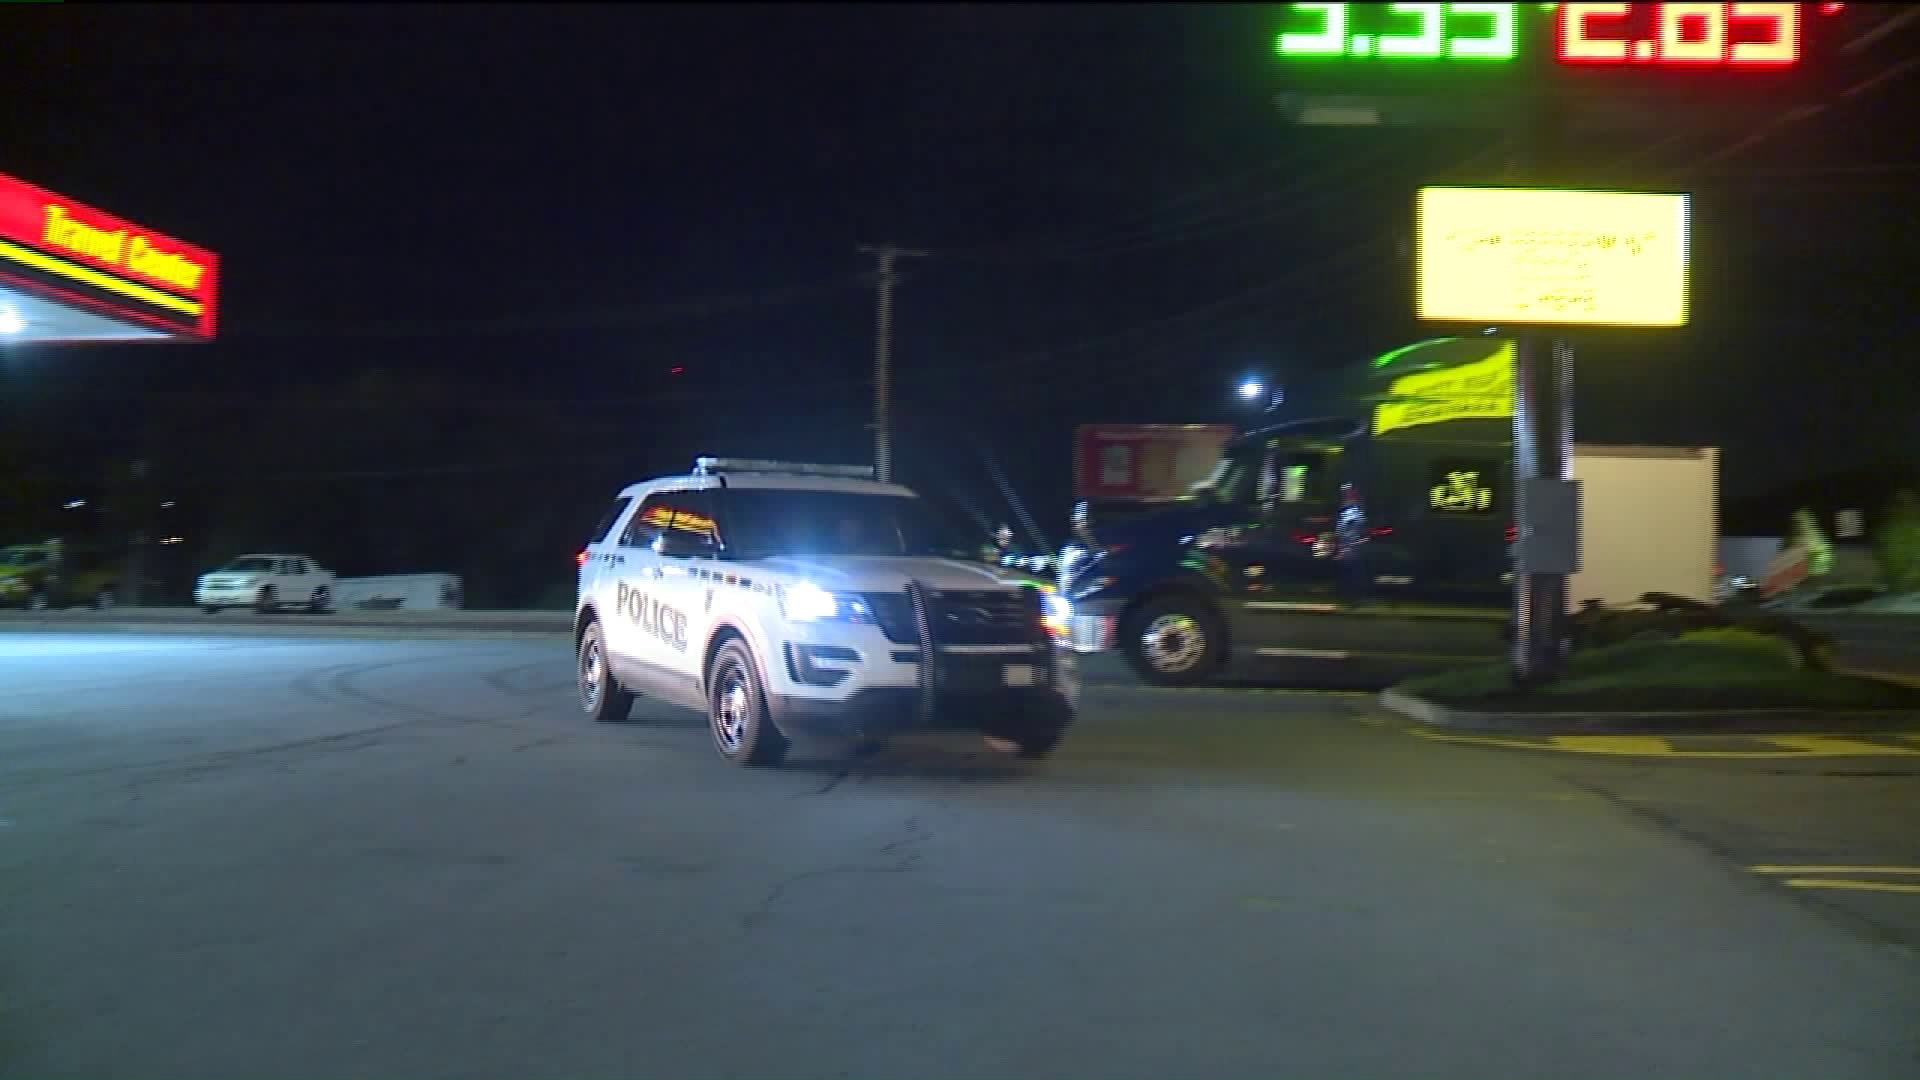 Pilot Truck Stop Robbed in Luzerne County